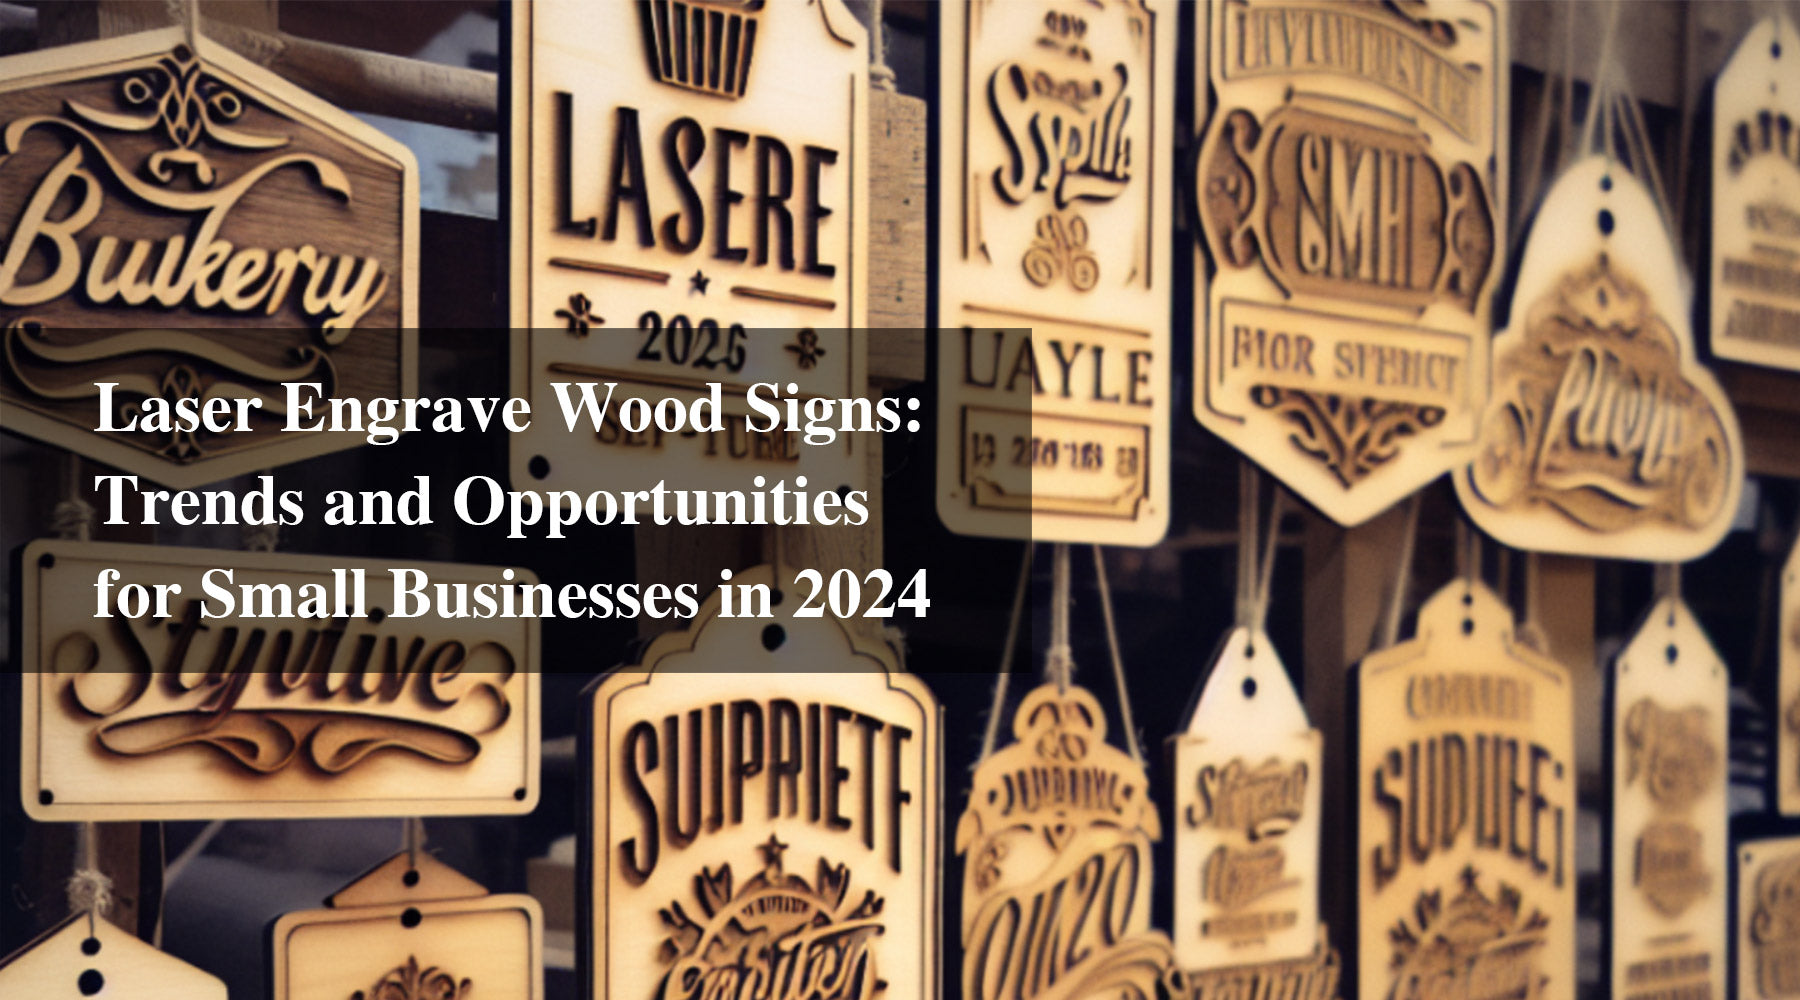 Laser Engrave Wood Signs: Trends and Opportunities for Small Businesses in 2024